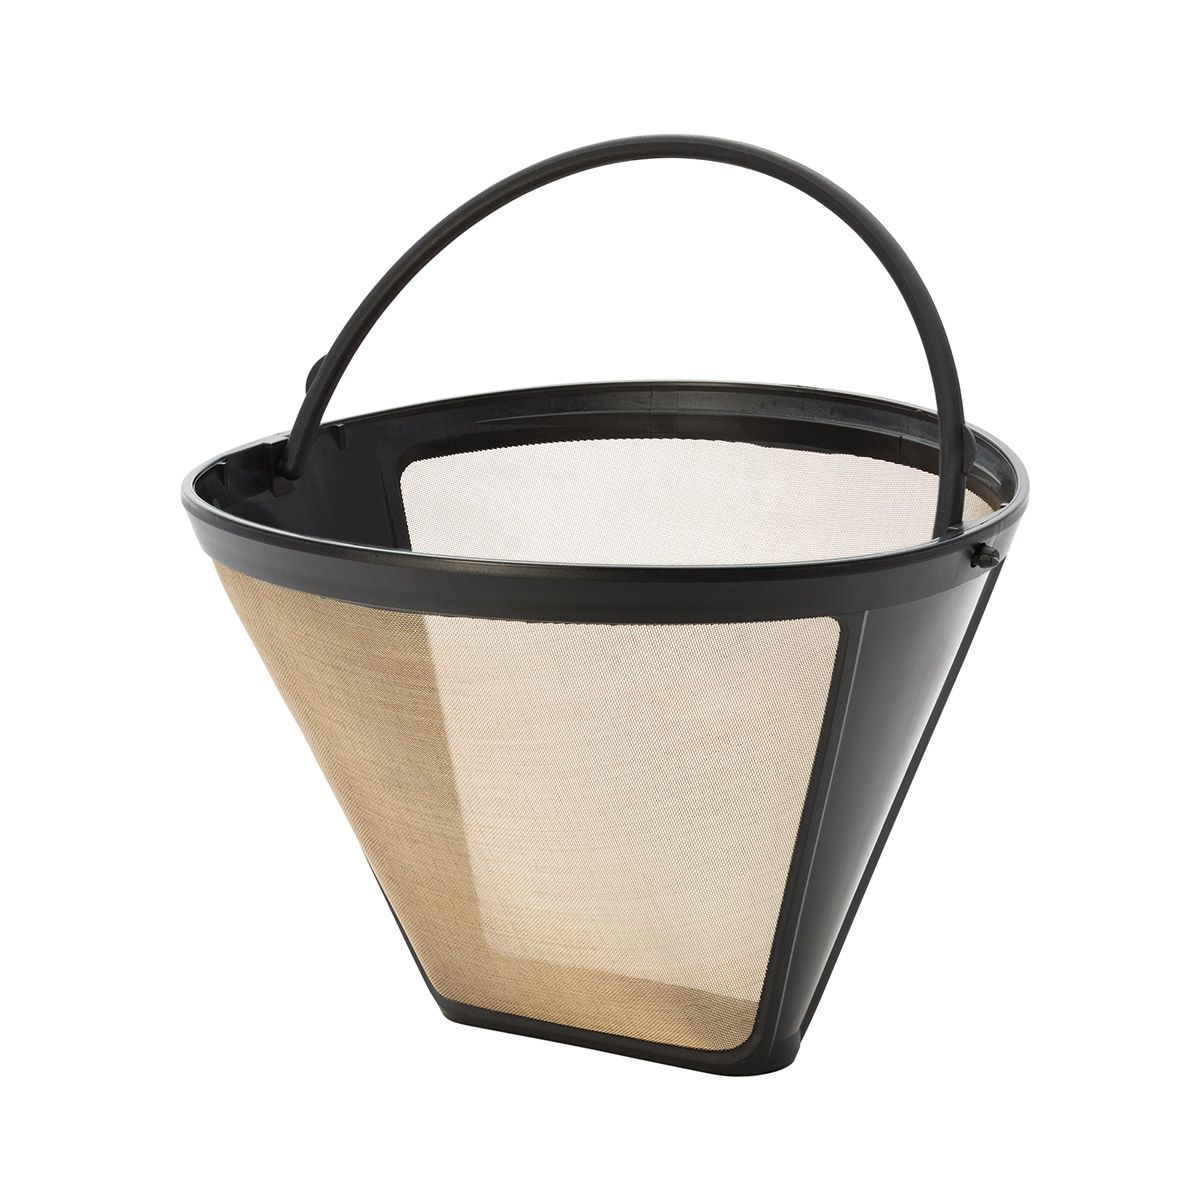 Fino Gold Mesh Coffee Filter, 4 Cup